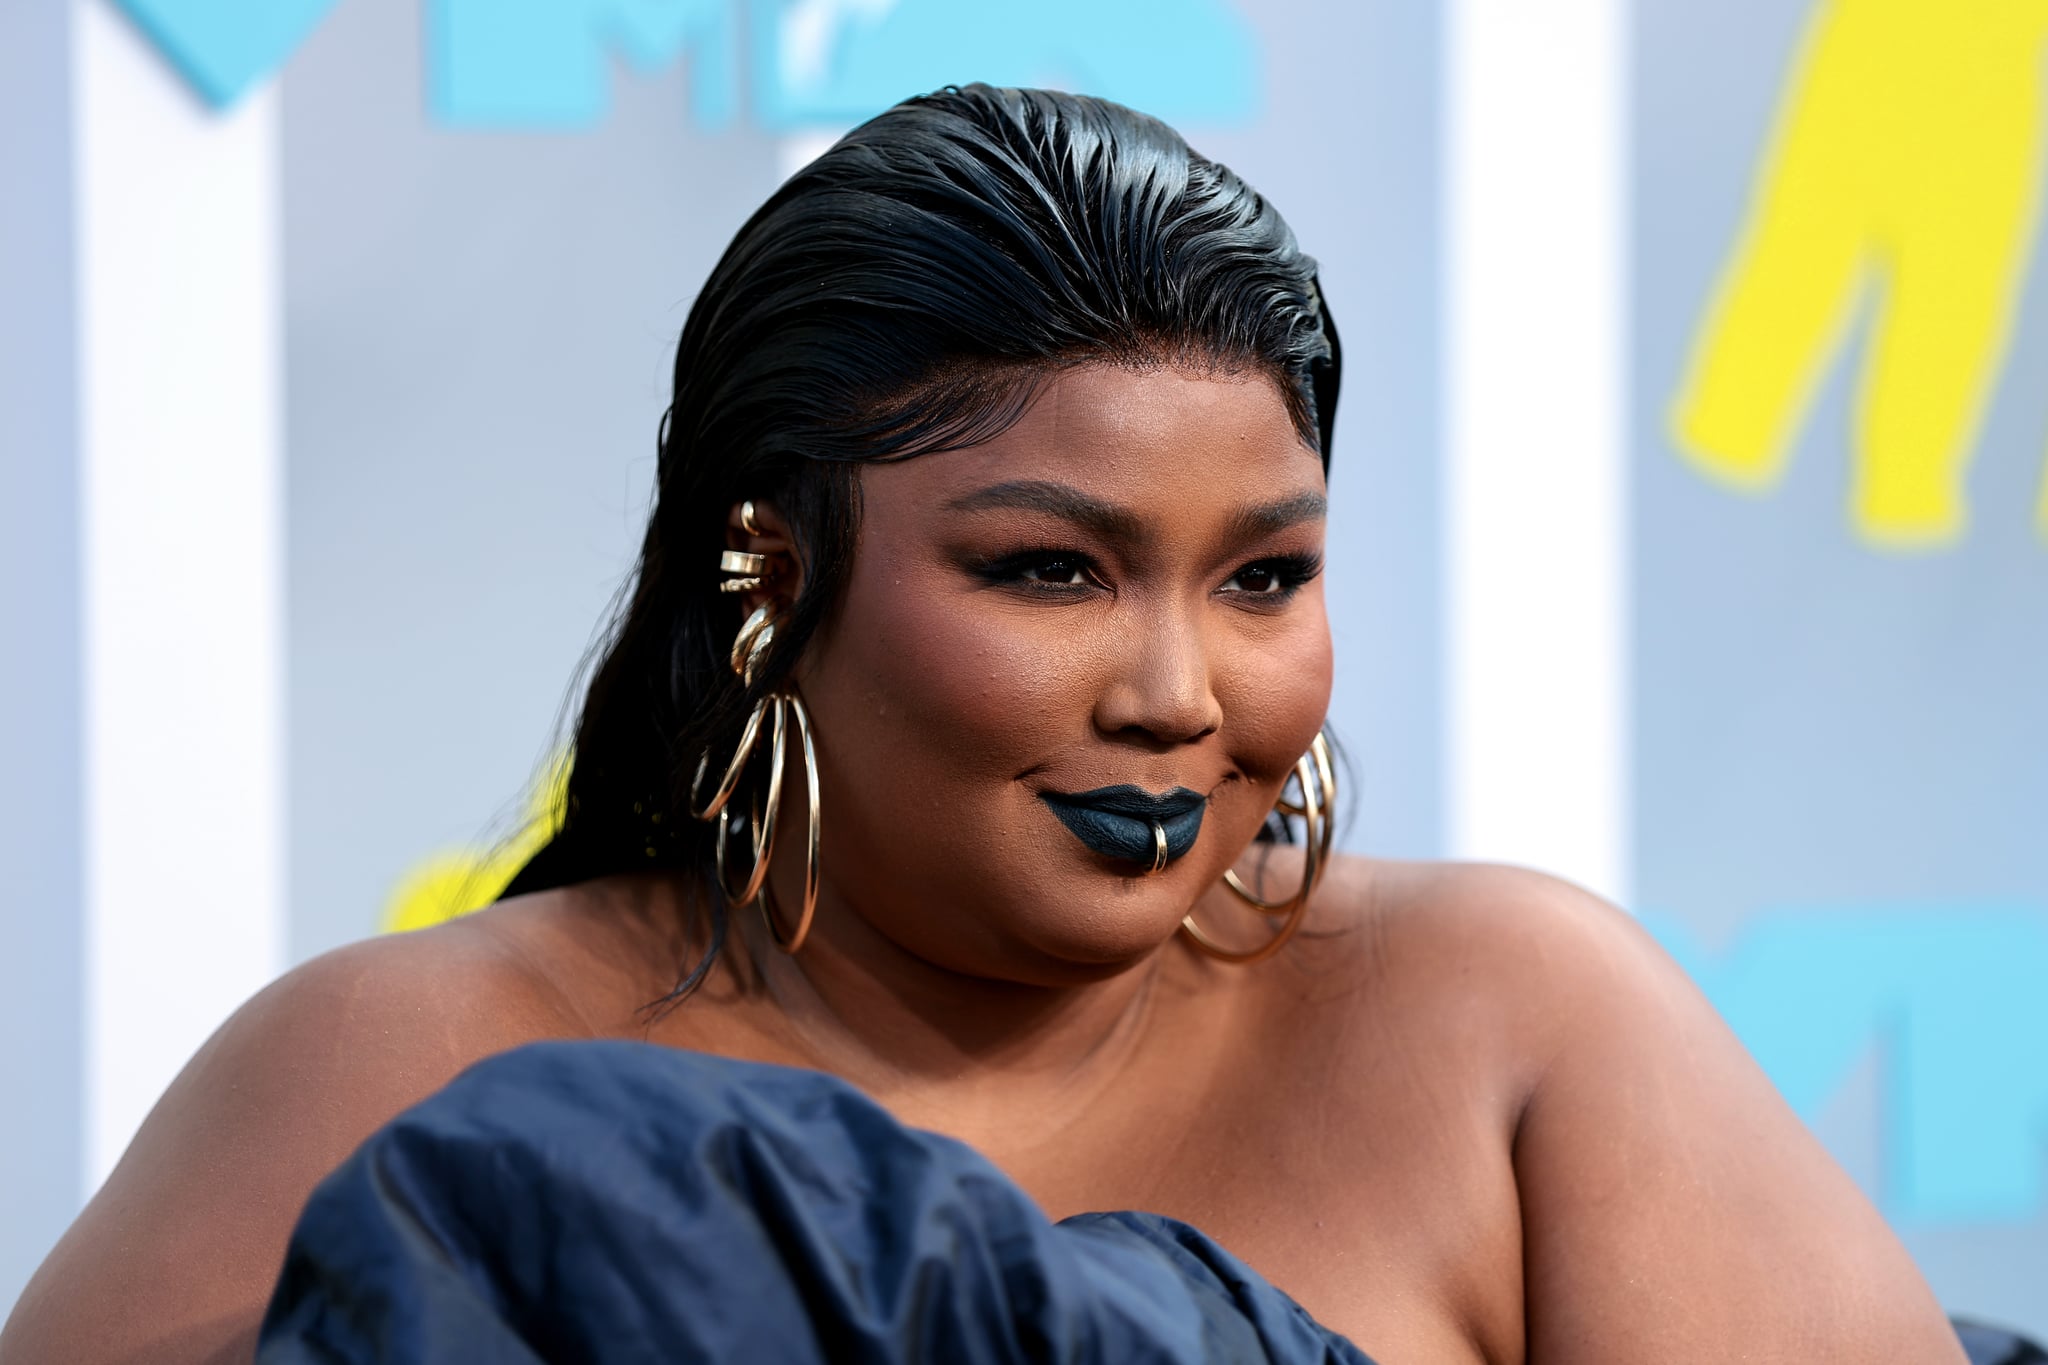 NEWARK, NEW JERSEY - AUGUST 28: Lizzo attends the 2022 MTV VMAs at Prudential Centre on August 28, 2022 in Newark, New Jersey. (Photo by Dimitrios Kambouris/Getty Images for MTV/Paramount Global)